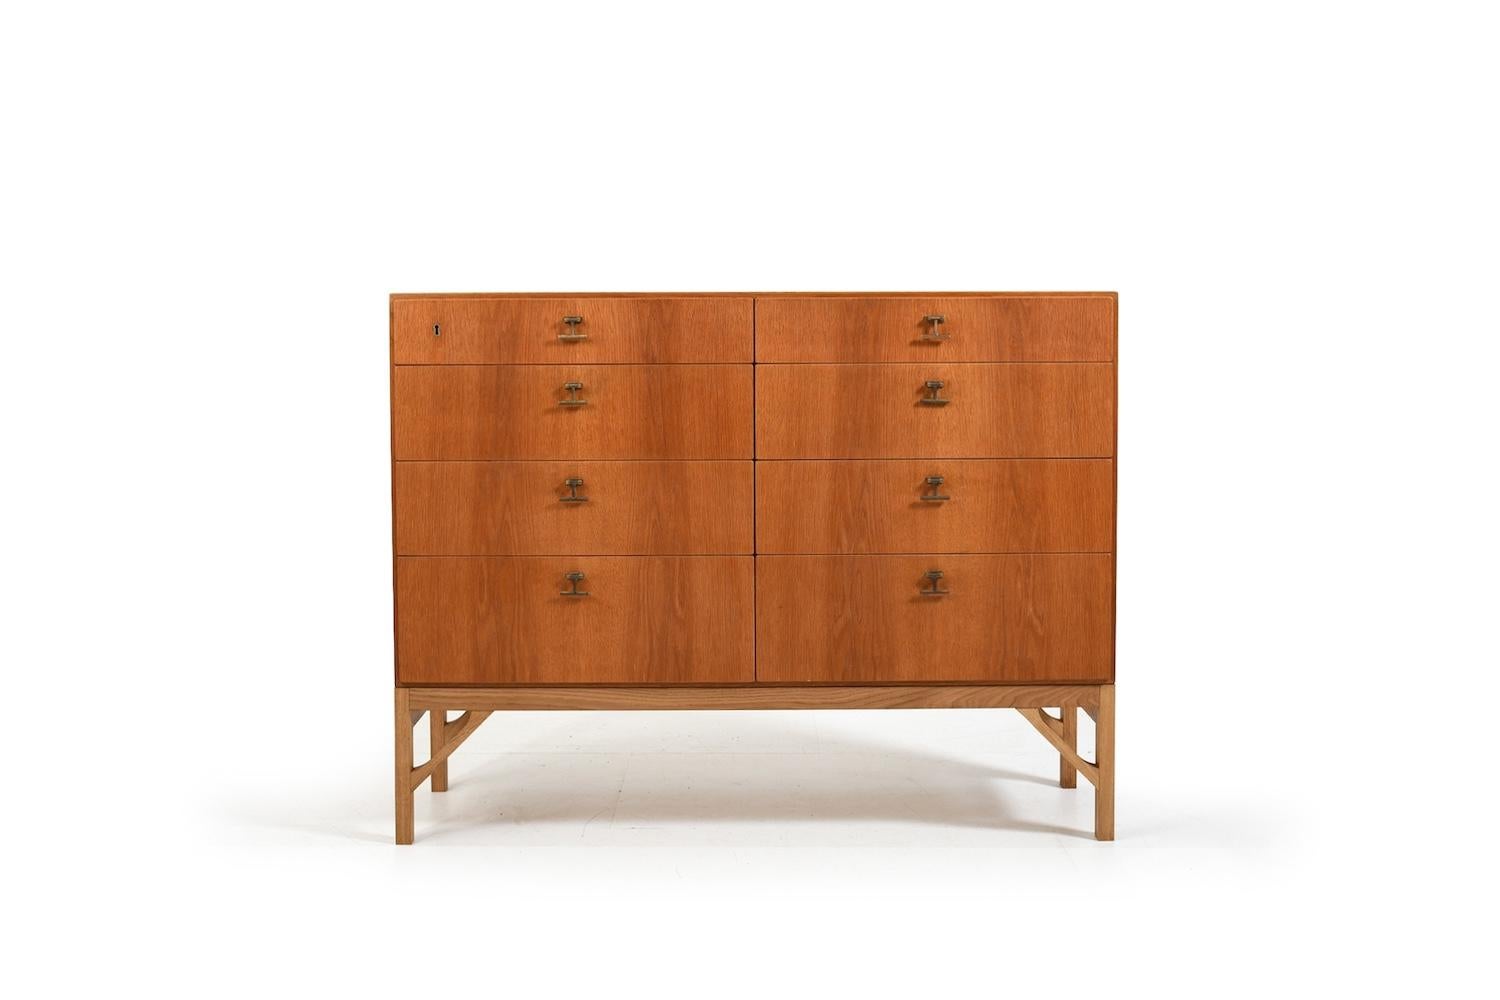 Fine chest of drawer, model no.234 in oak  by Børge Mogensen for FDB Møbler, Denmark. Eight drawers with fittings / handles made of brass. Incl. key.  Børge Mogensen designed his China Series in 1960s. Produced 1960s.